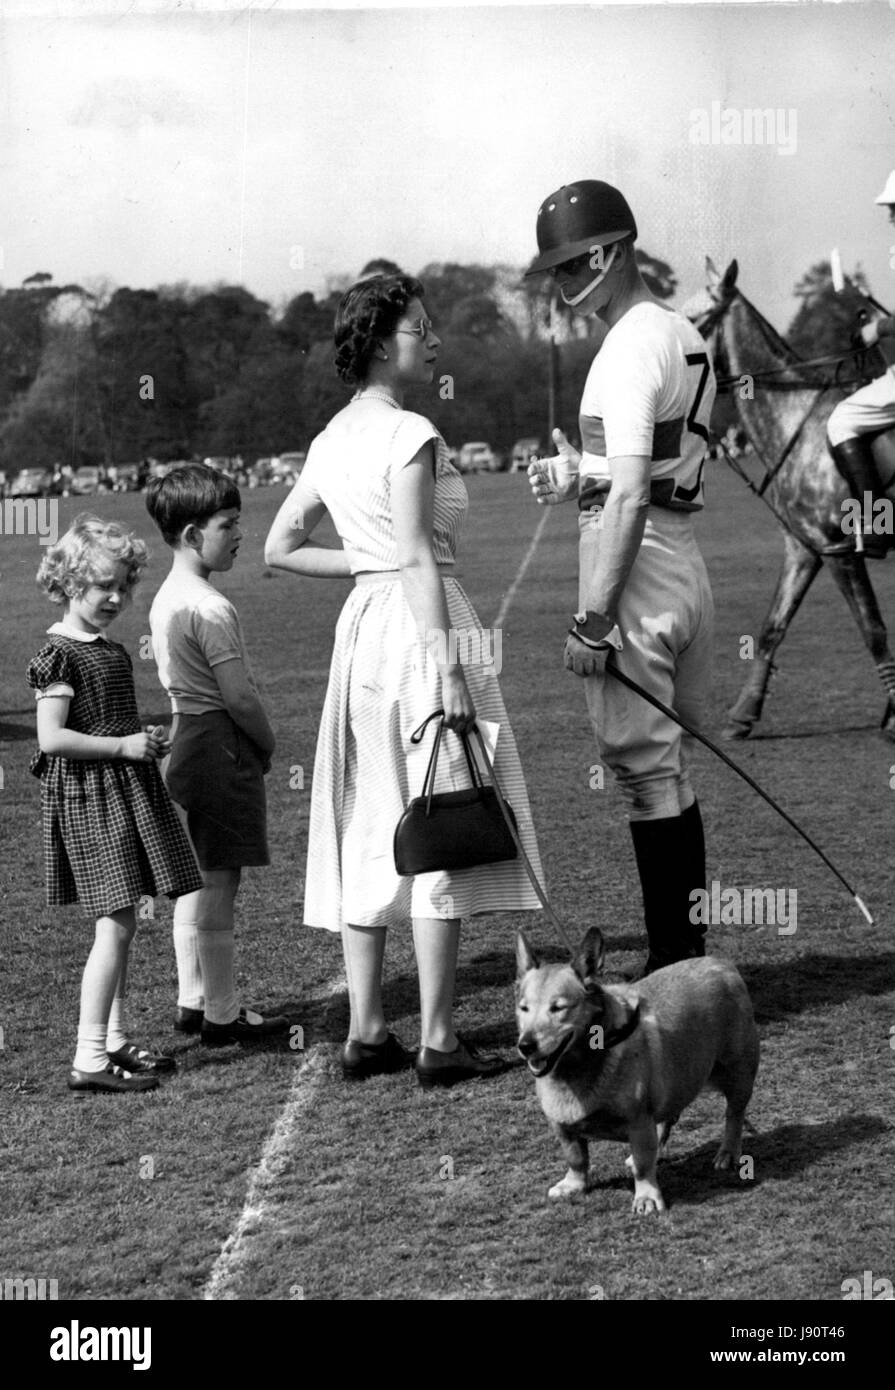 May 05, 1956 - The Duke of Edinburgh plays Polo at Windsor... The Queen and Royal Children attend.: The Duke of Edinburgh played polo on Smith's lawn in Windsor Great Park this afternoon. The Queen  the two Royal children watched the games. Photo shows the Queen goes over to chat to the Duke between chukkers accompanied by Prince Charles and Princess Anne. (Credit Image: © Keystone Press Agency/Keystone USA via ZUMAPRESS.com) Stock Photo